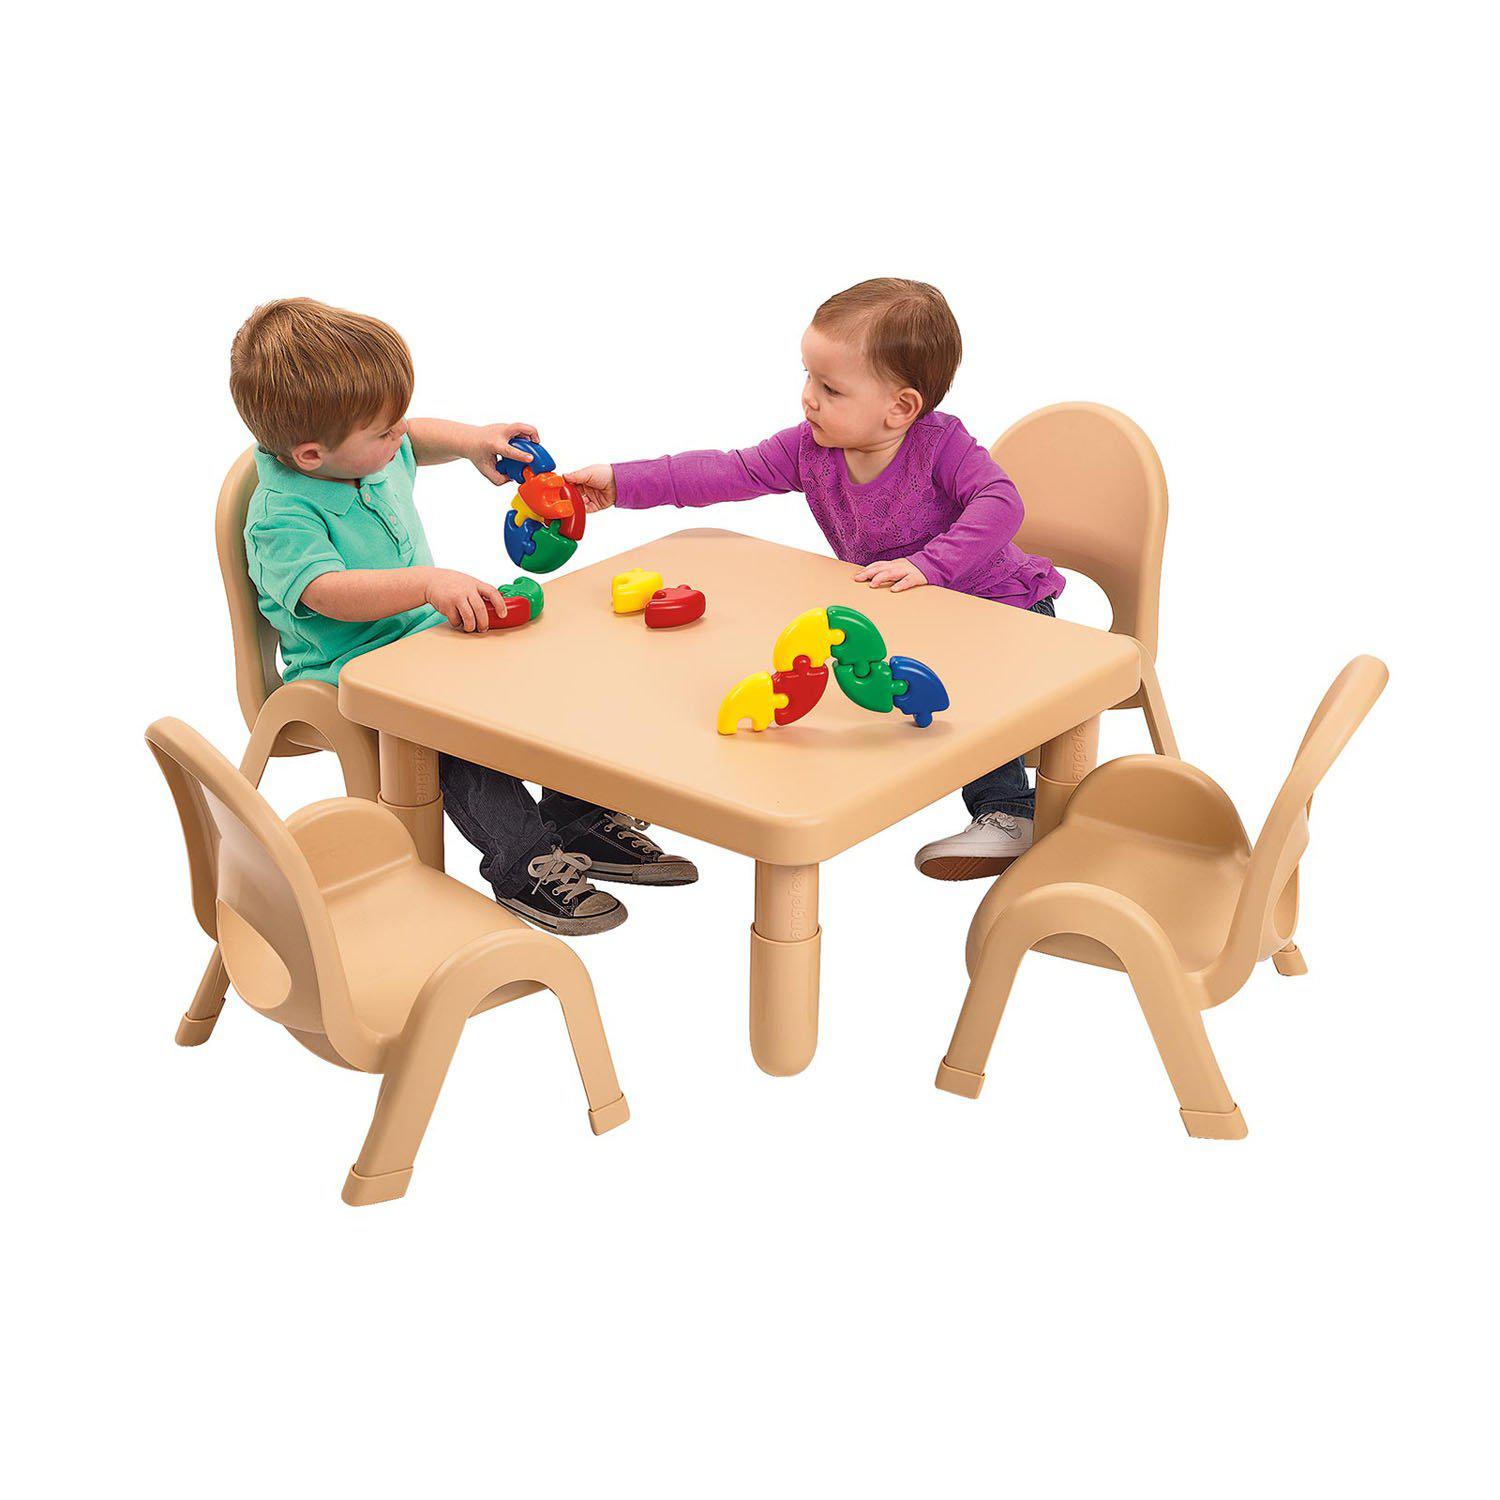 Toddler MyValue™ Table and Chair Set - 28" Square x 12"-High Natural Tan Table with 4 Matching 5"-High Chairs